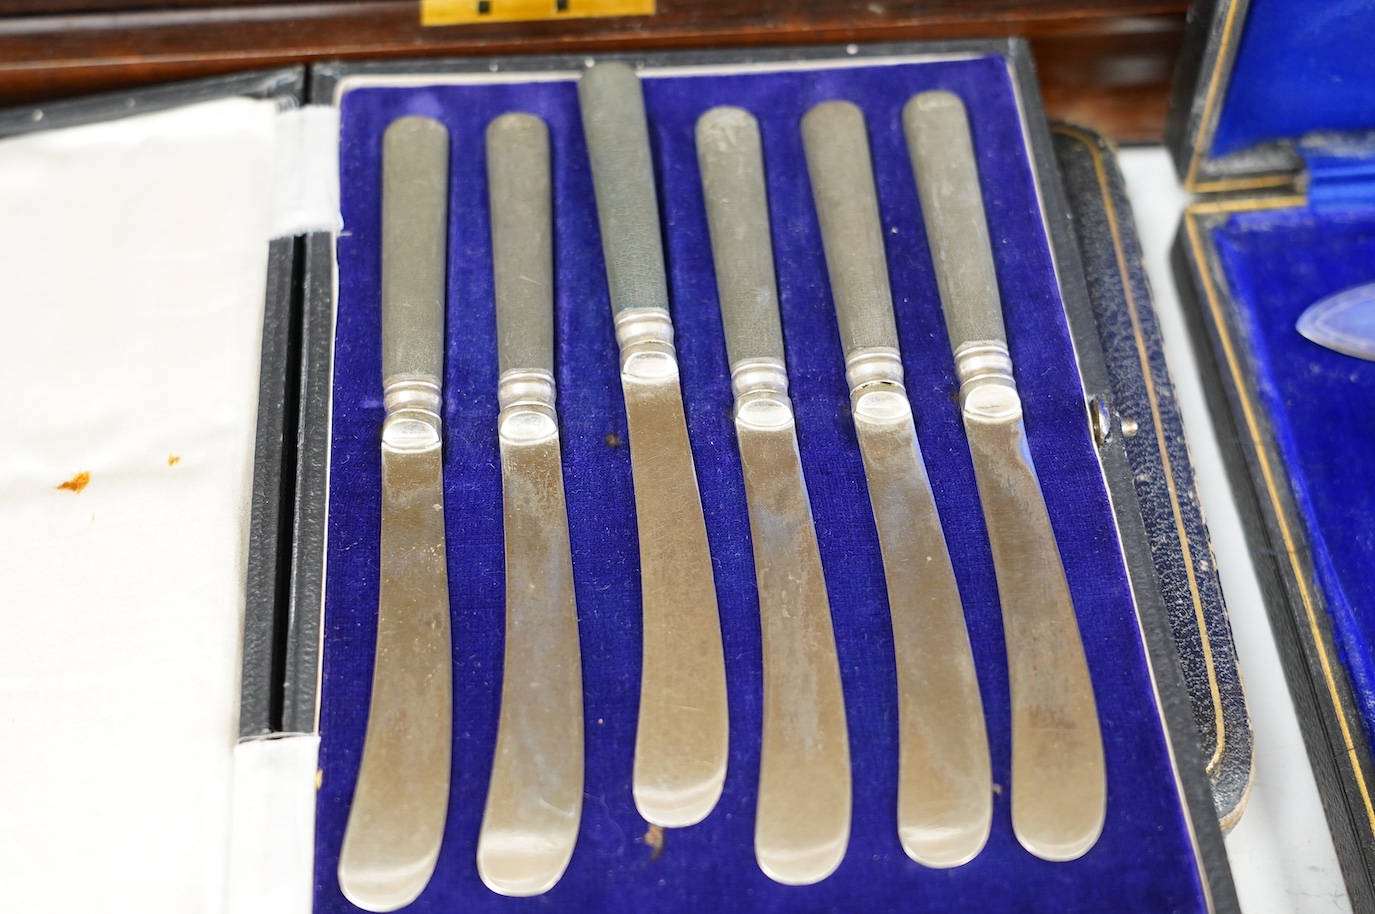 A cased set of six silver handled tea knives and six other cased plated sets. Condition - fair